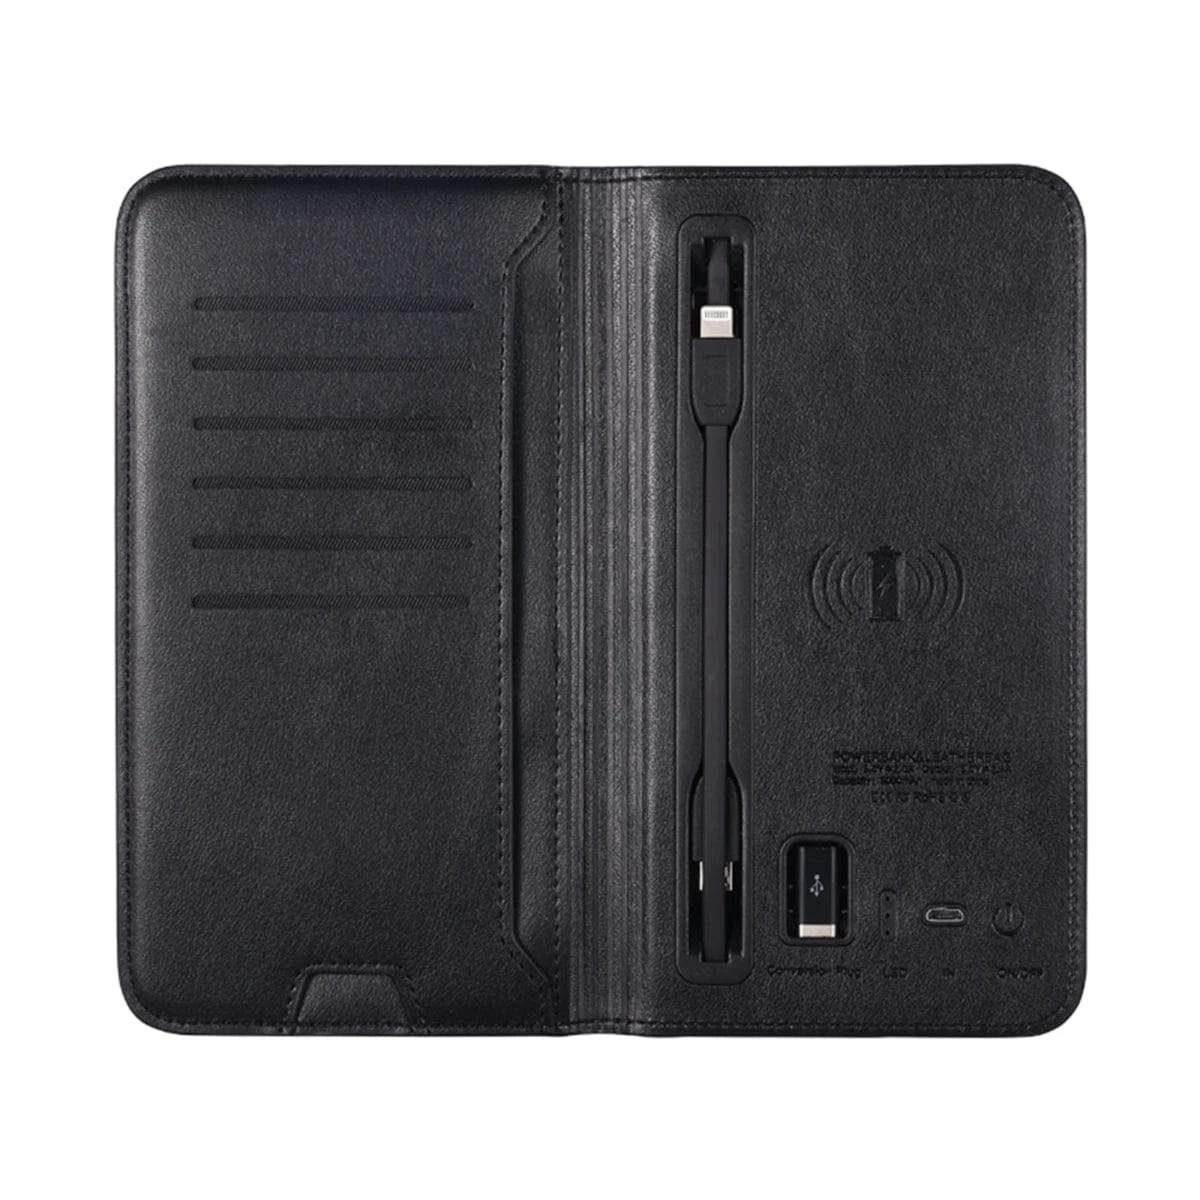 PU Leather Powerbank Charging Wallet With Wireless Charger Power Bank Travel Wallet 6800mah